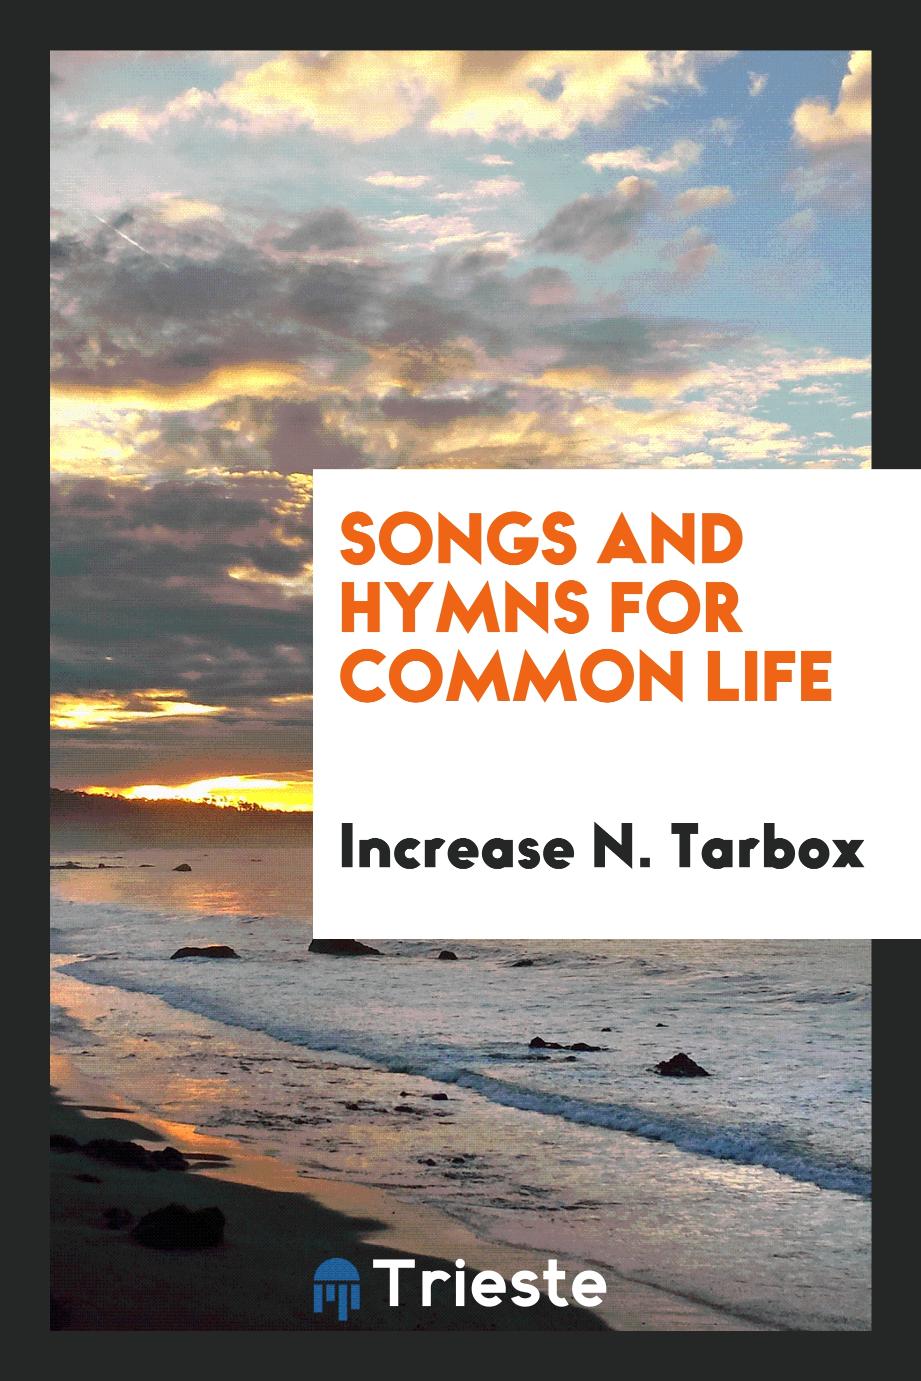 Songs and hymns for common life